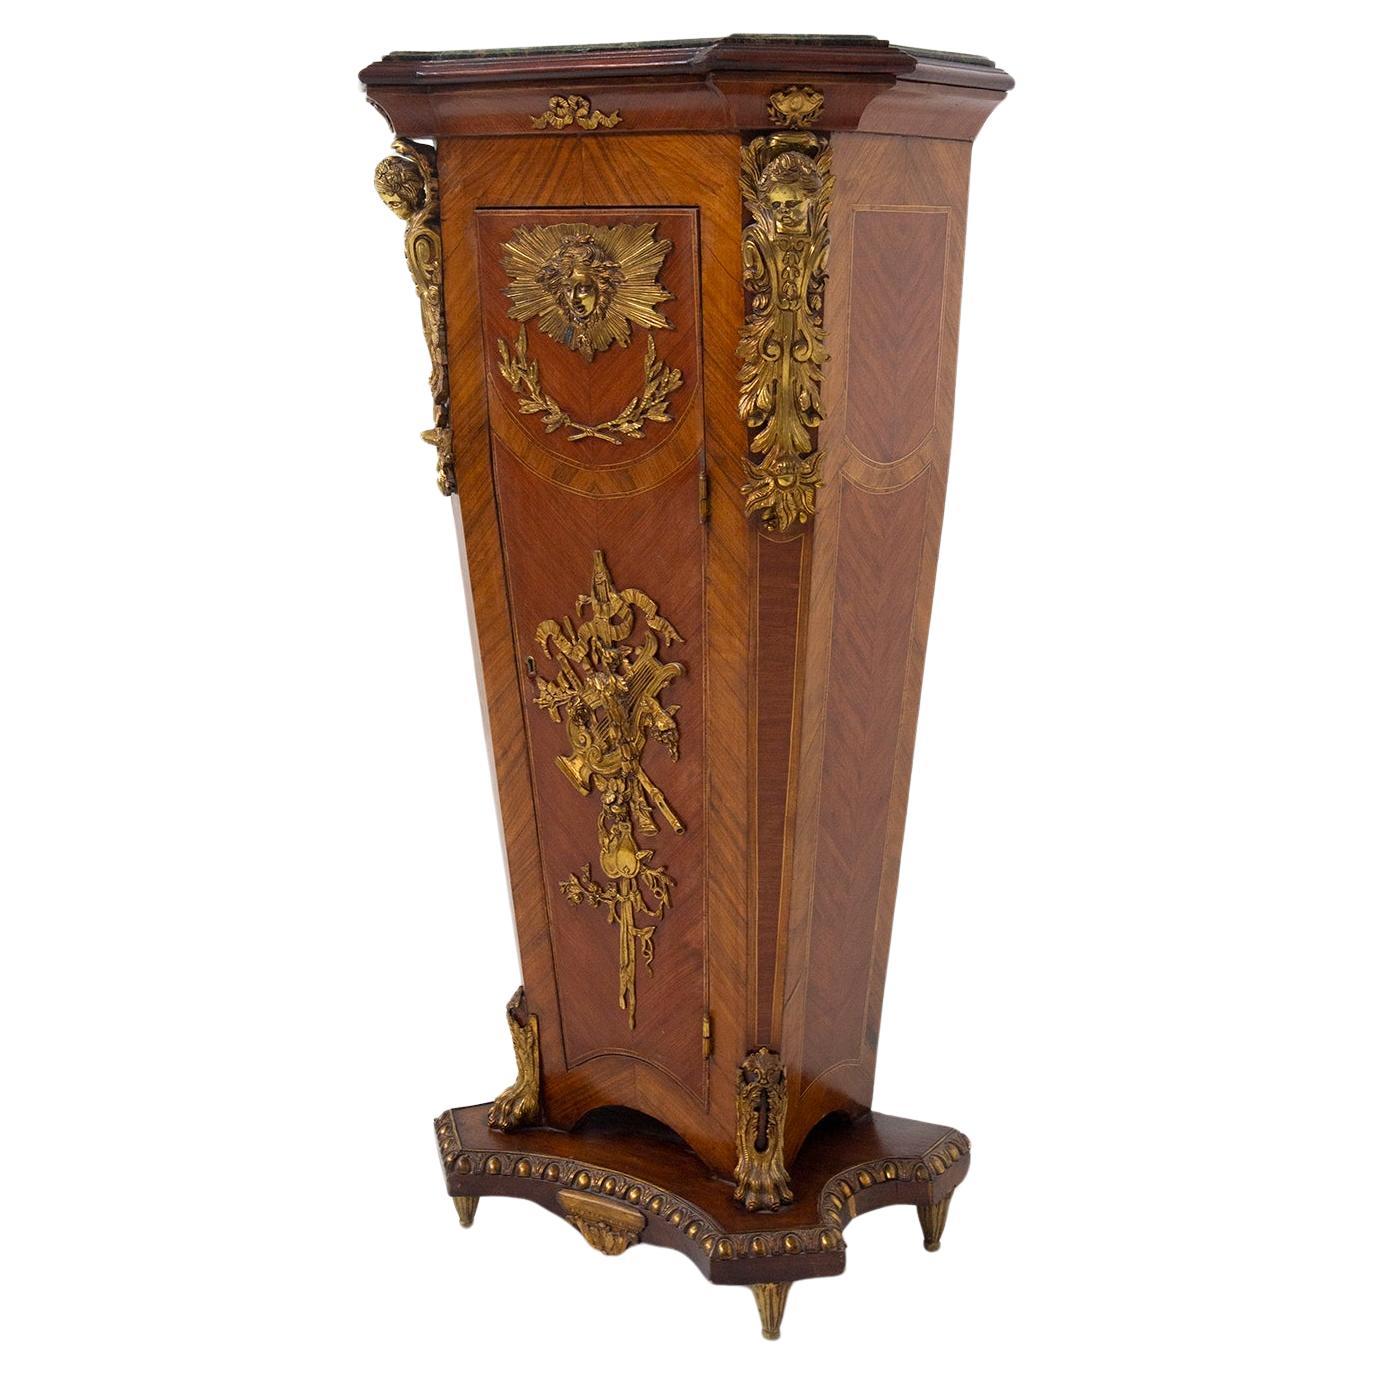 A French Louis XVI-style gilt bronze mounted wooden pedestal For Sale